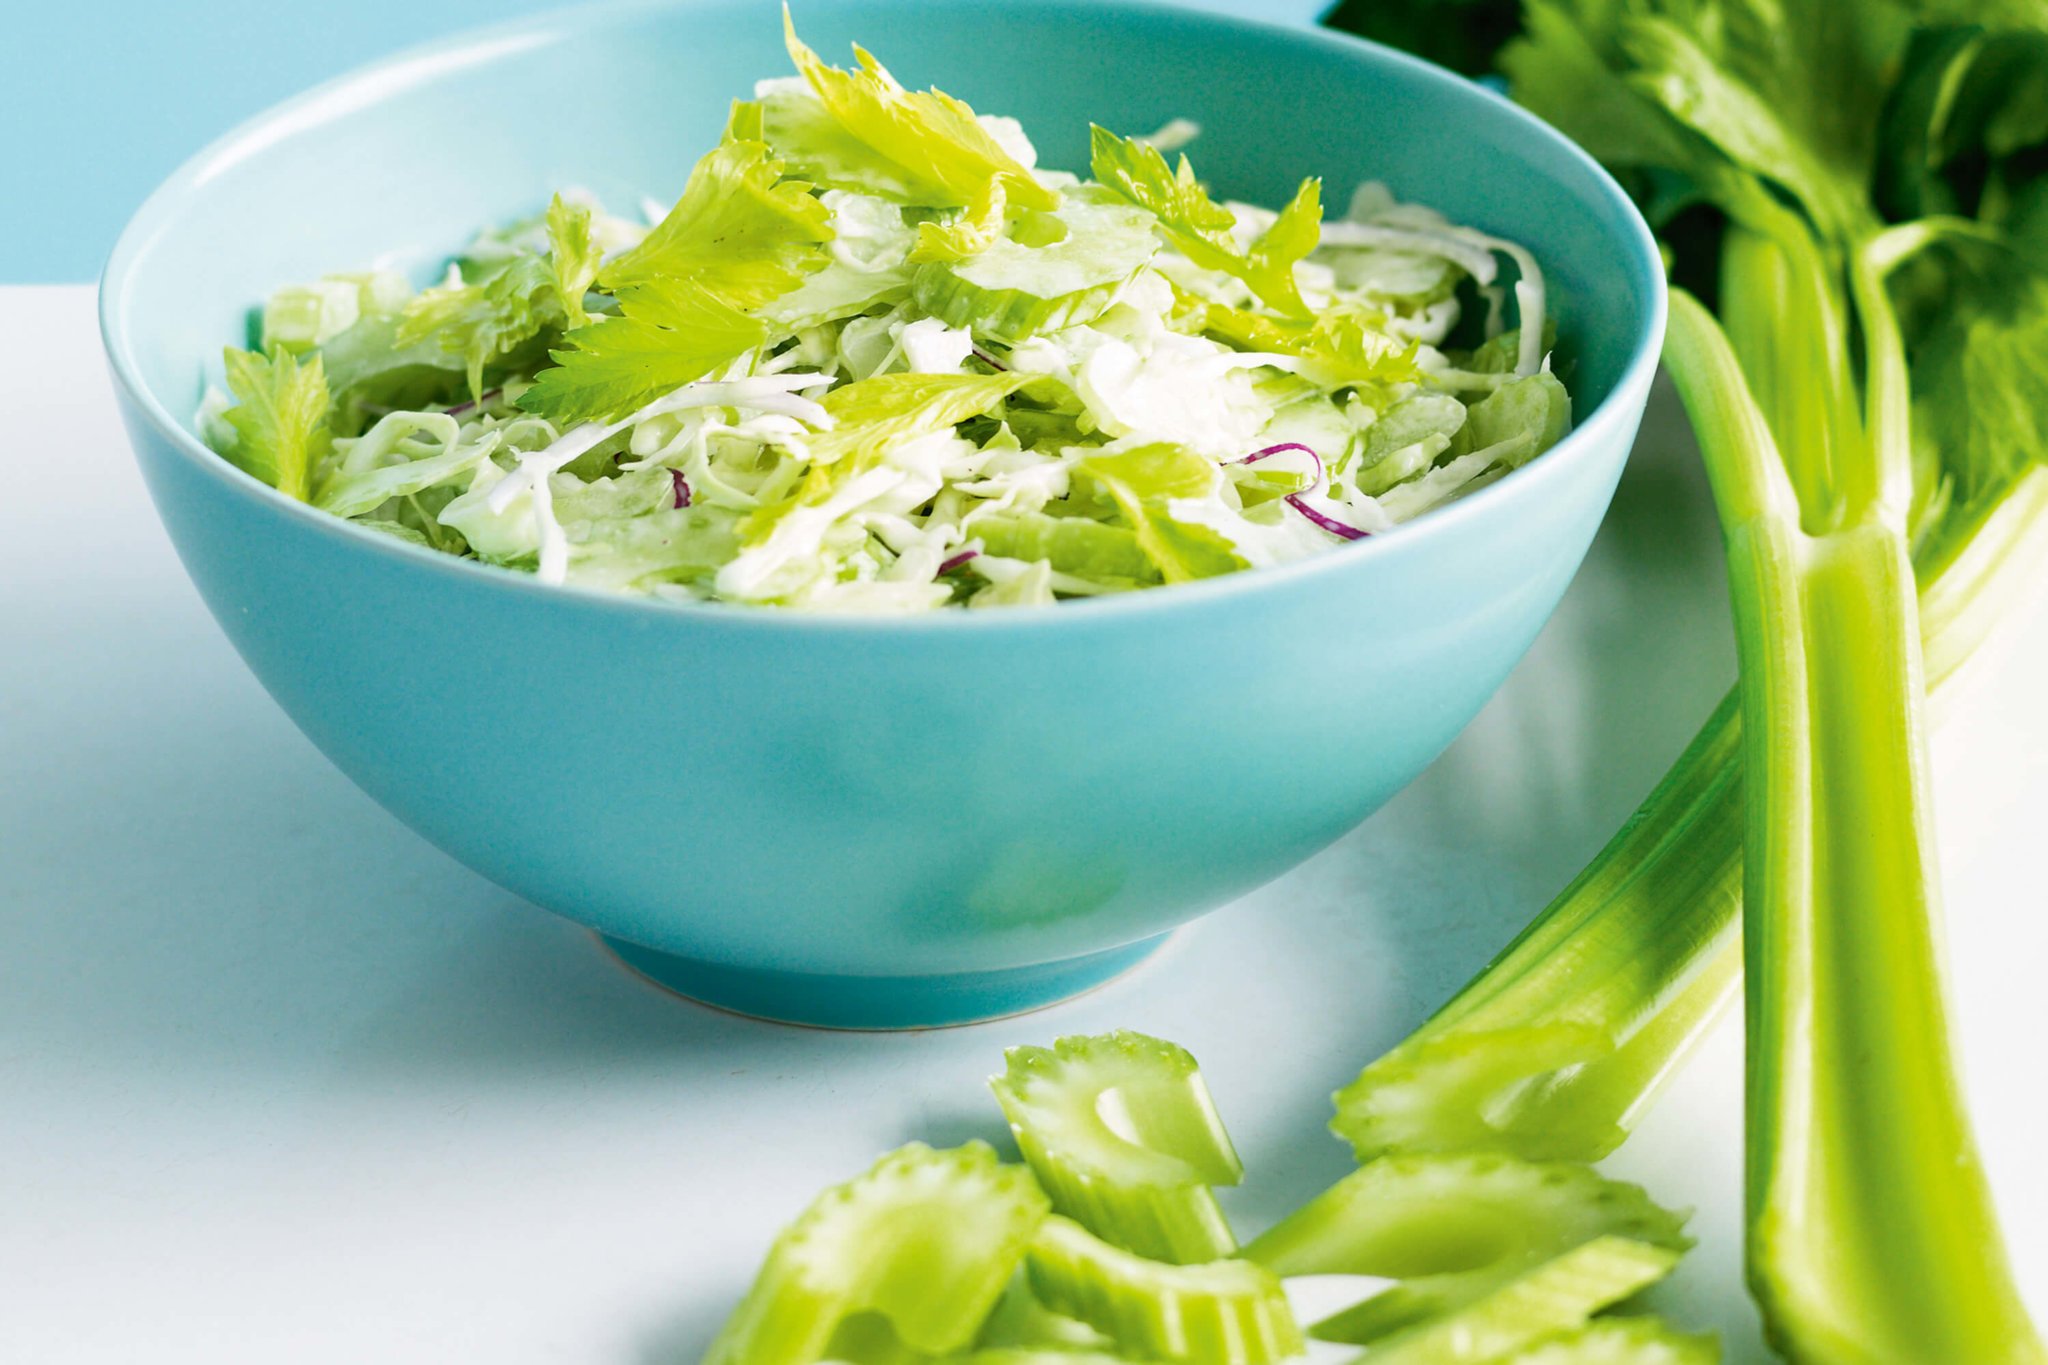 celery salad in a green bowl